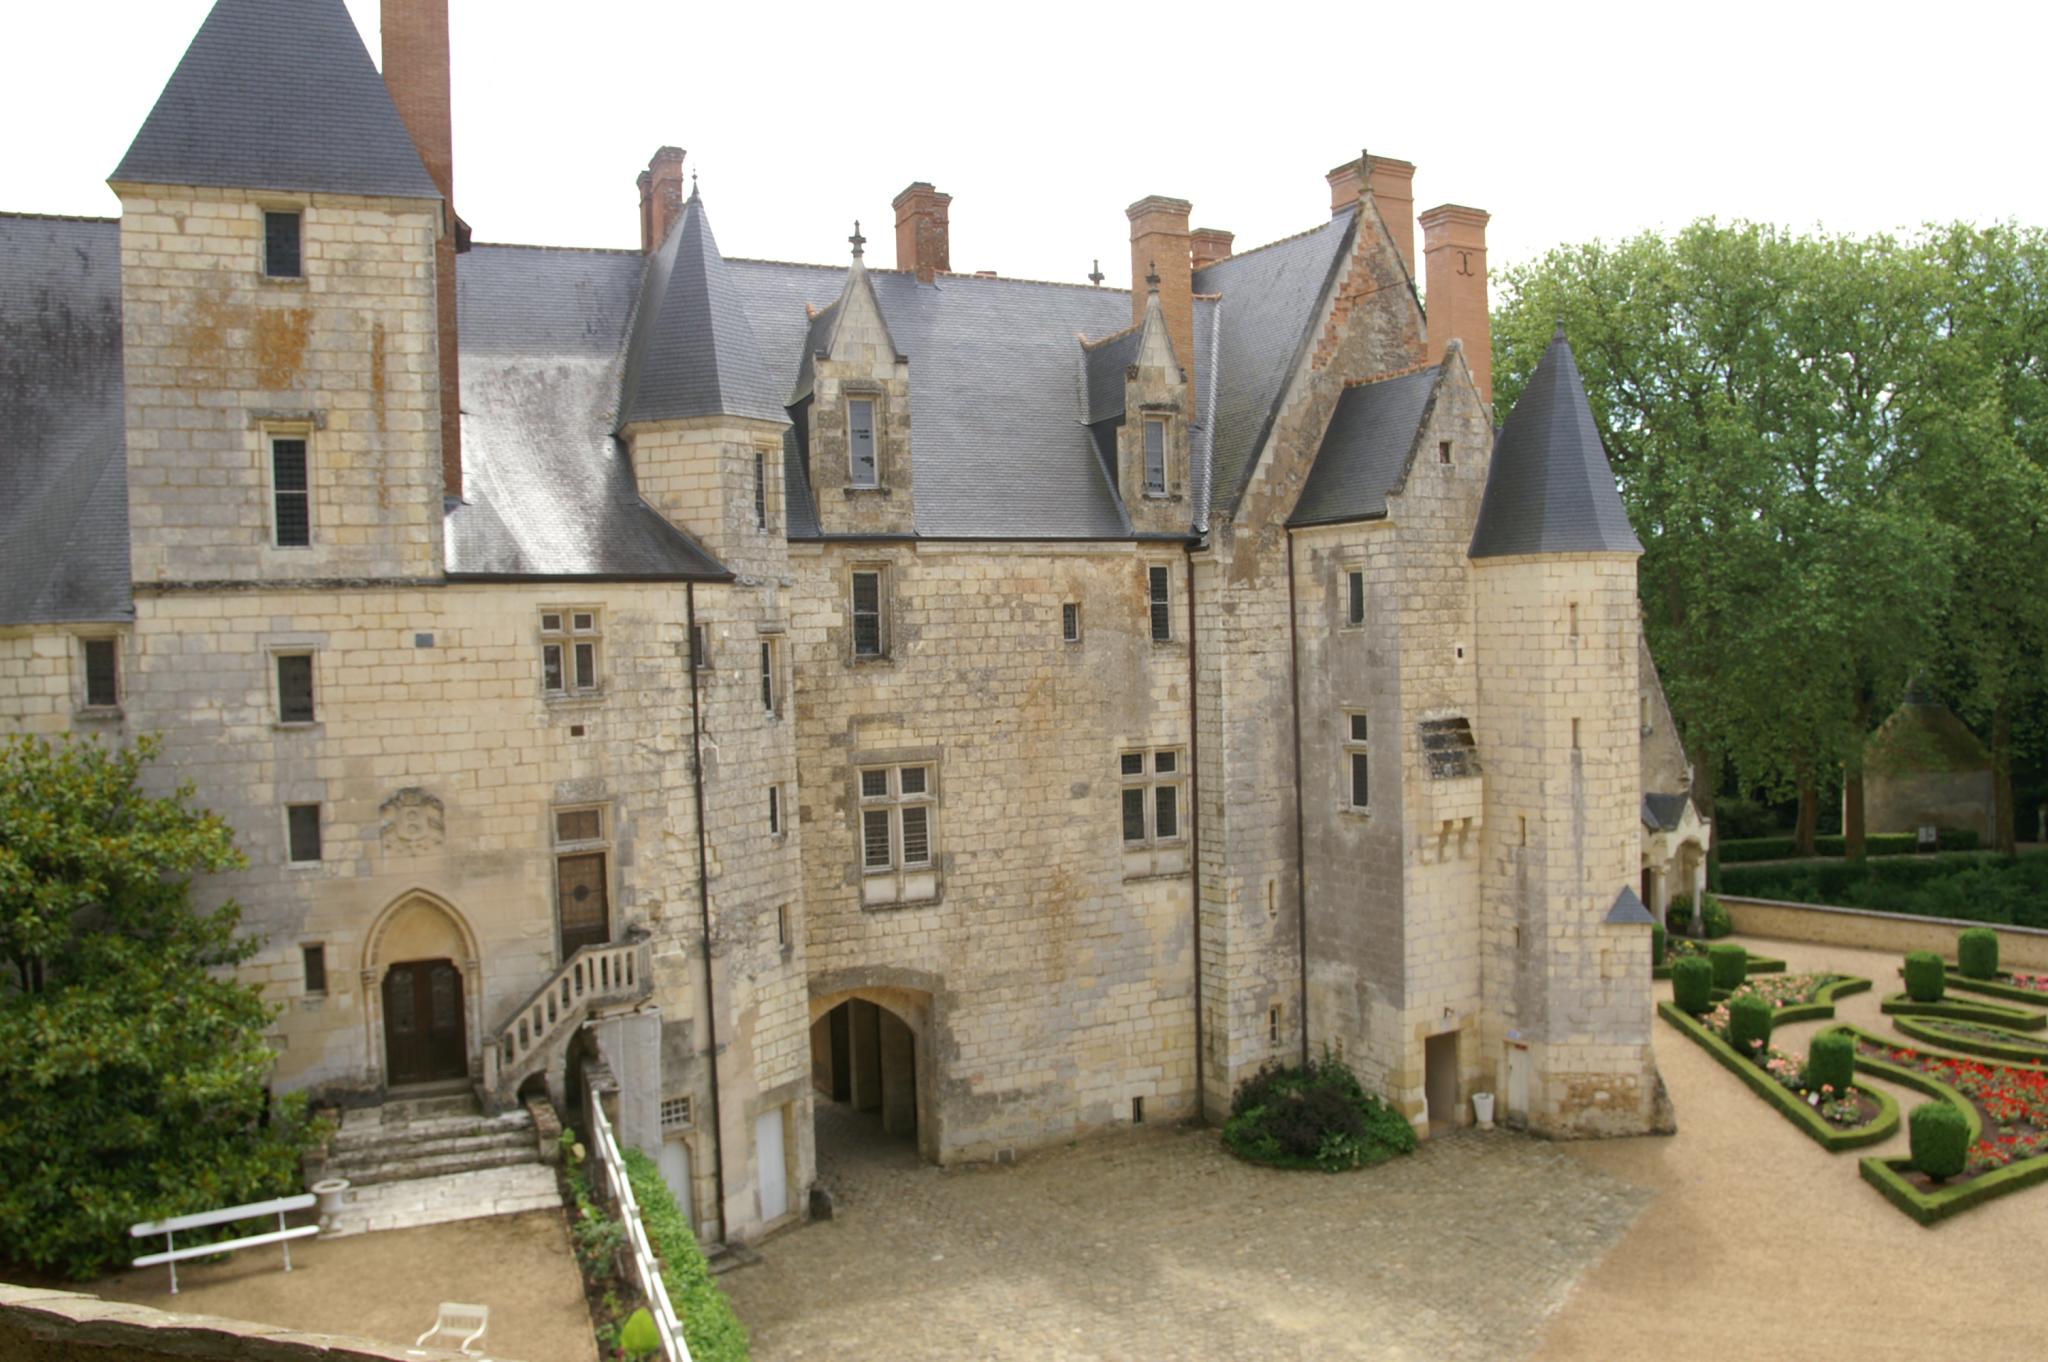 Par David Merrett from Daventry, England — Château de Courtanvaux, CC BY 2.0, https://commons.wikimedia.org/w/index.php?curid=7363023